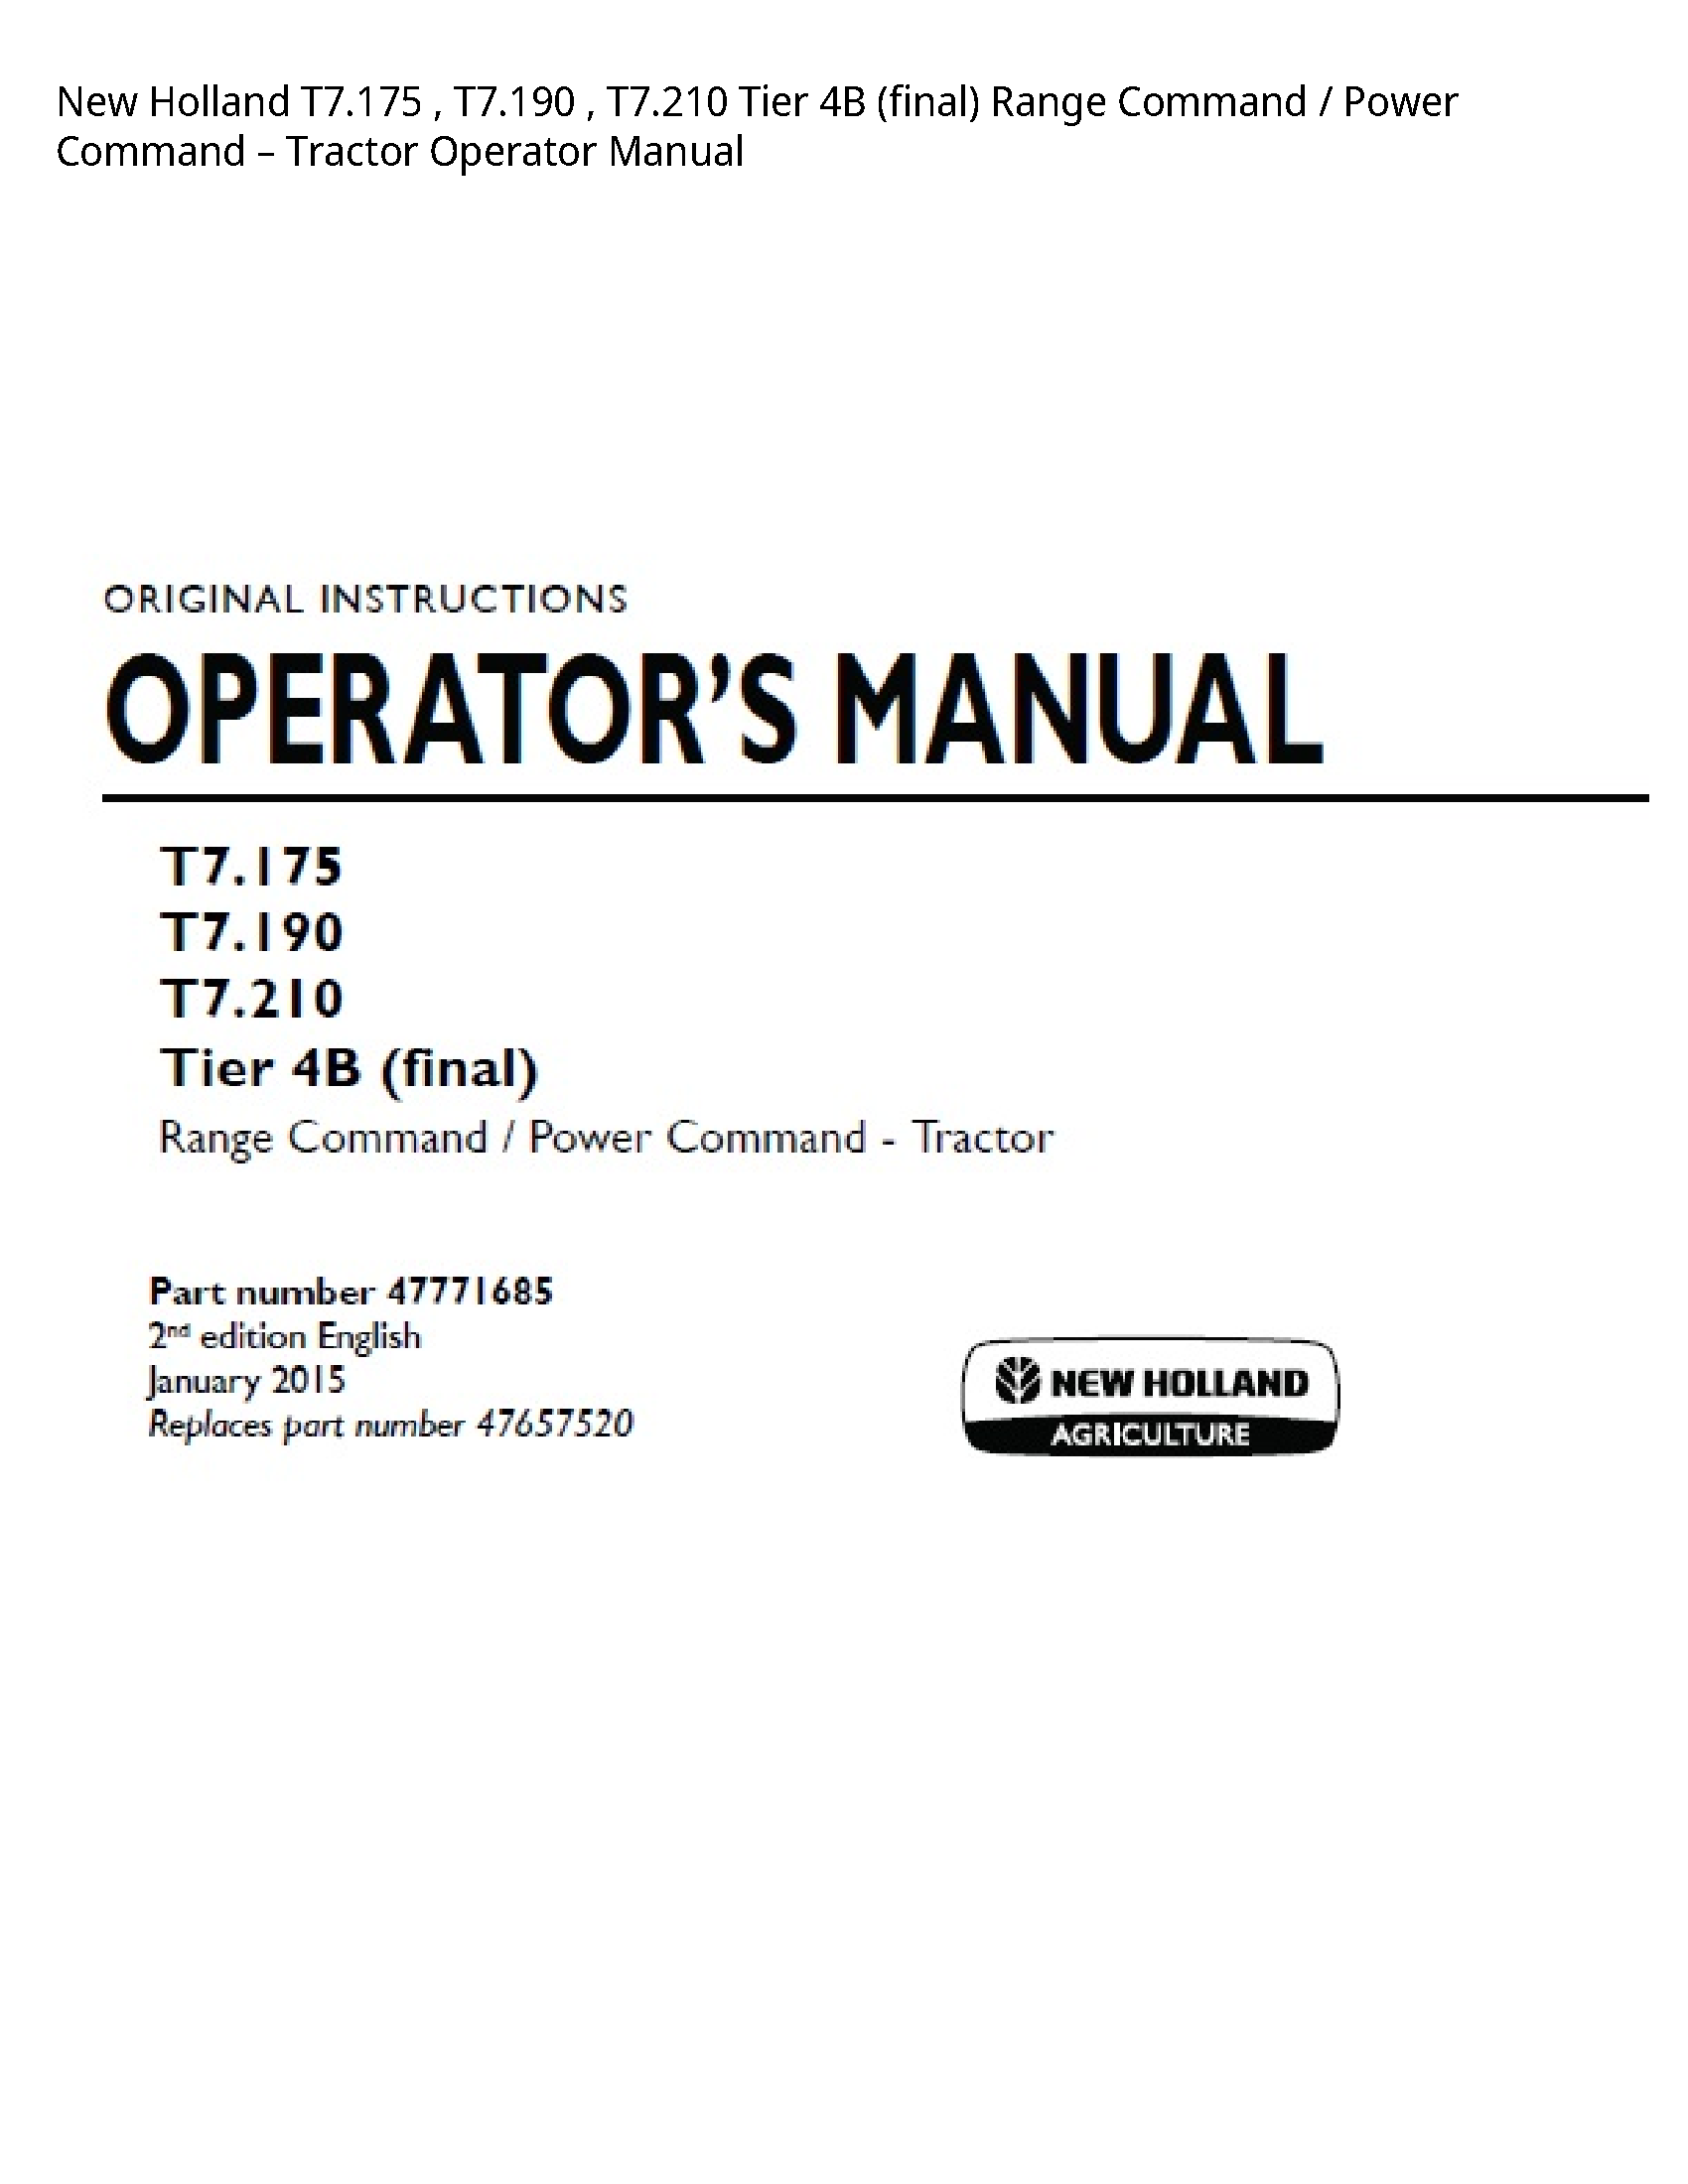 New Holland T7.175 Tier (final) Range Command Power Command Tractor Operator manual